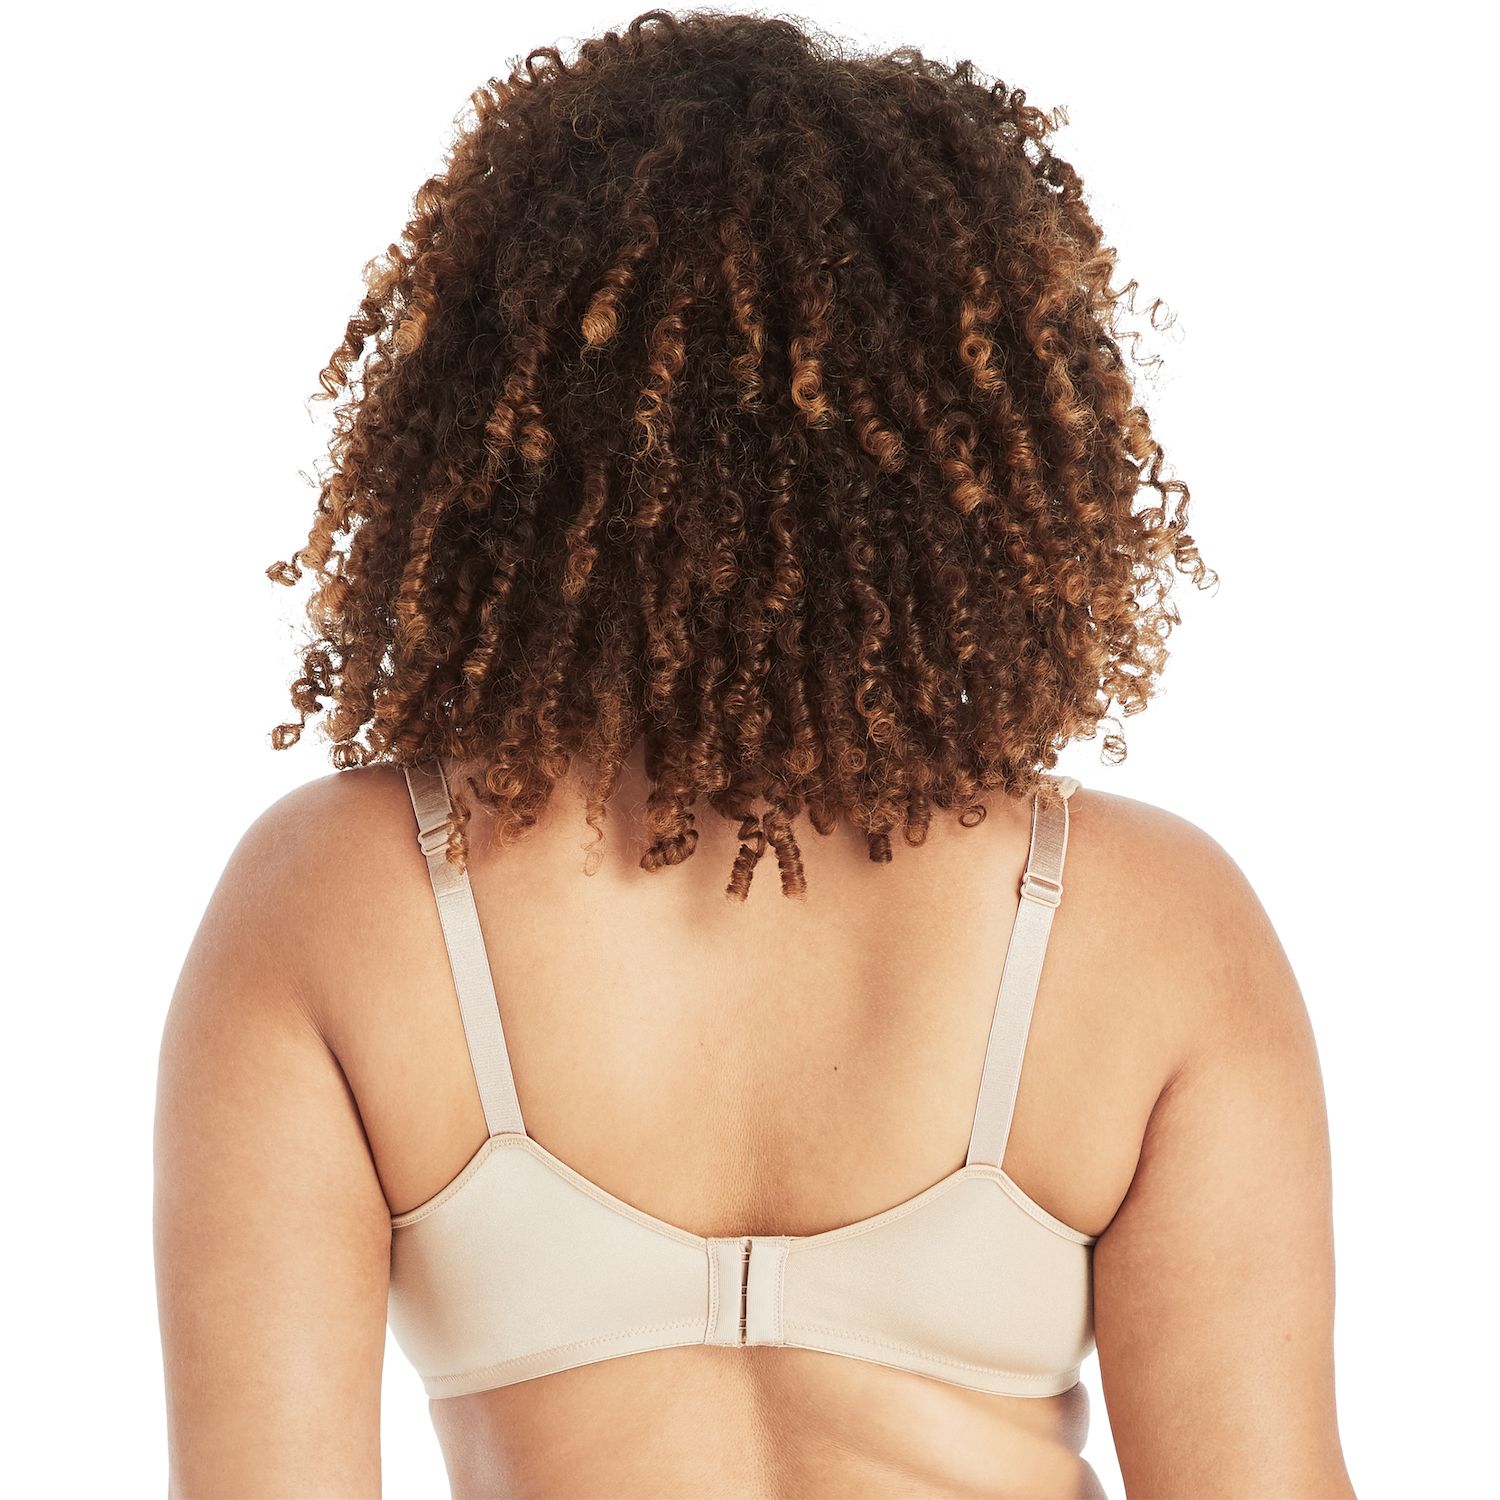 NWT PLAYTEX Love My Curves Underwire Bras: Assorted Styles, Sizes